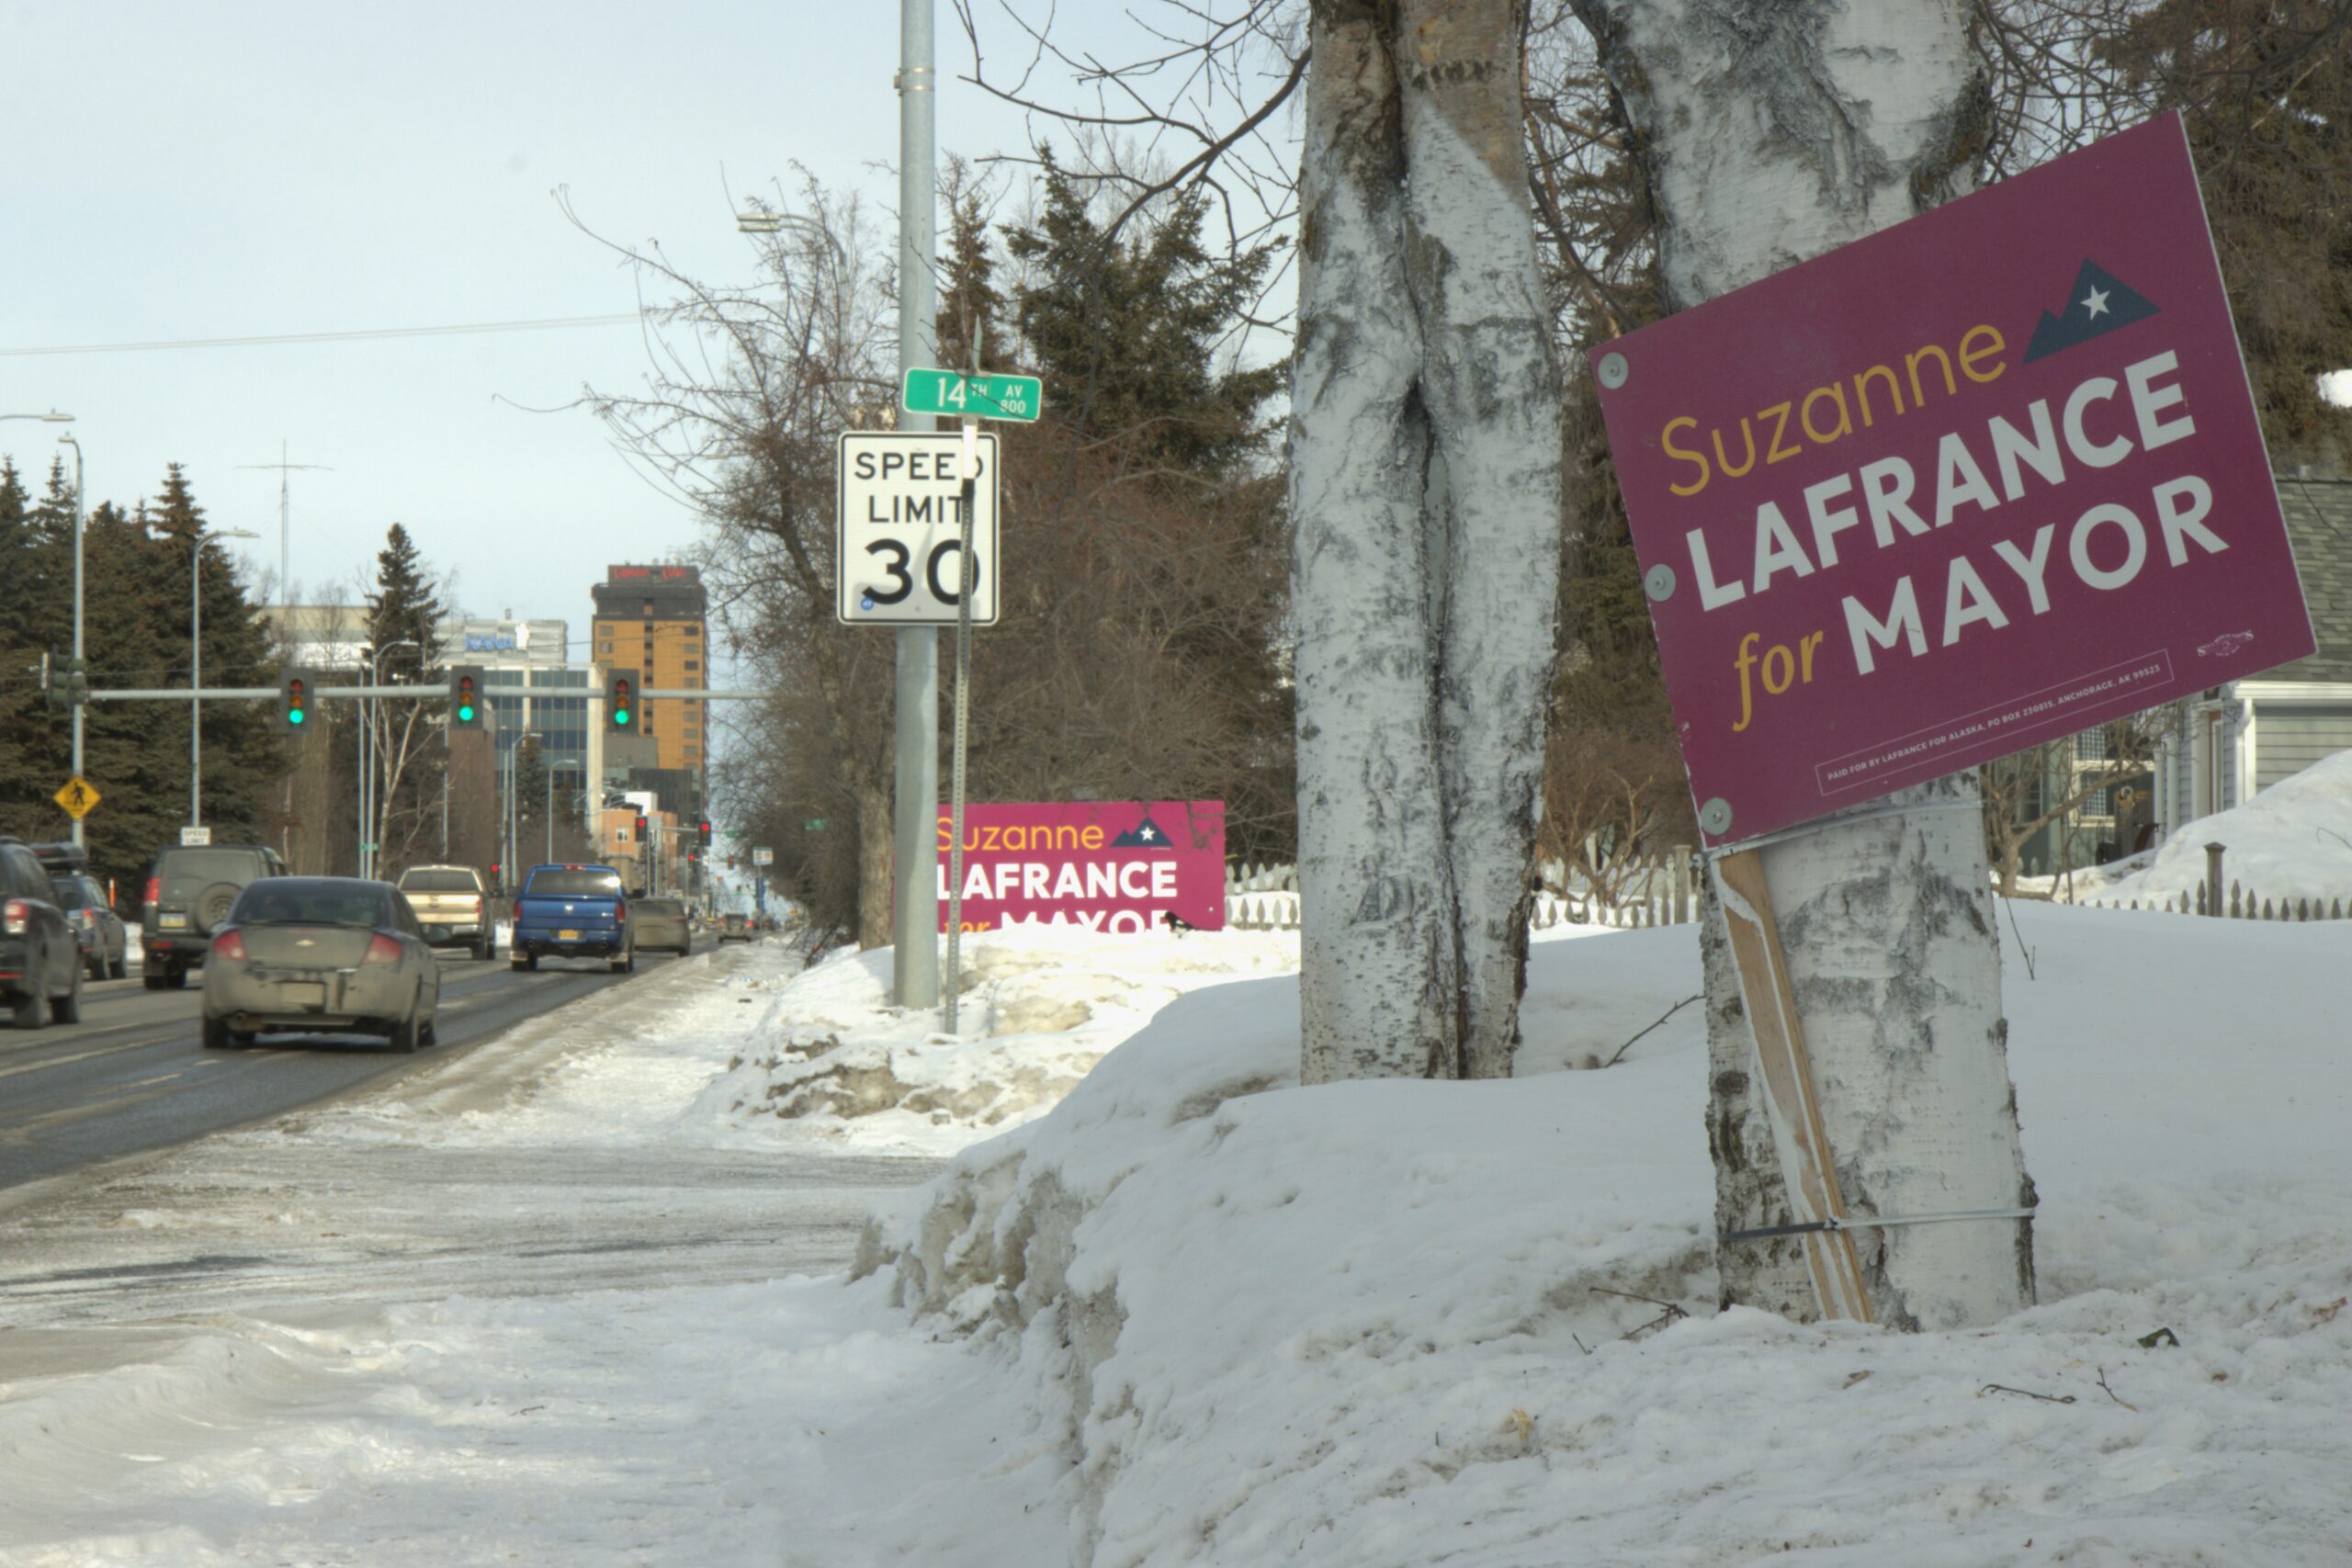 Campaign signs supporting mayoral candidate Suzanne LaFrance 